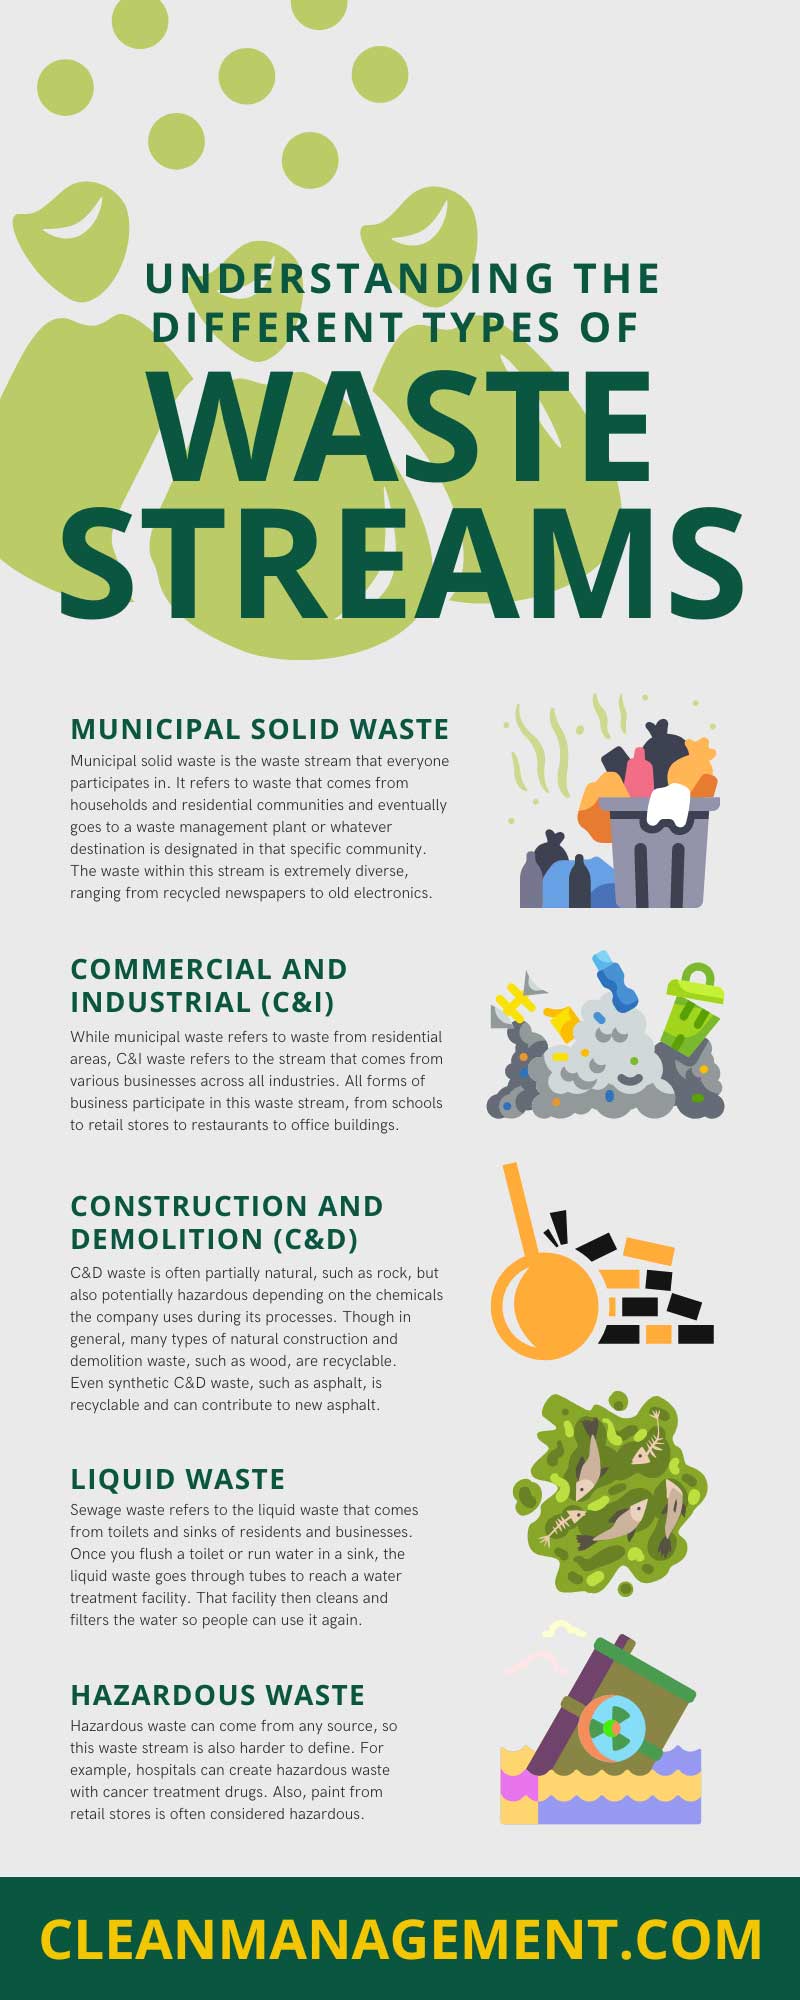 Understanding the Different Types of Waste Streams